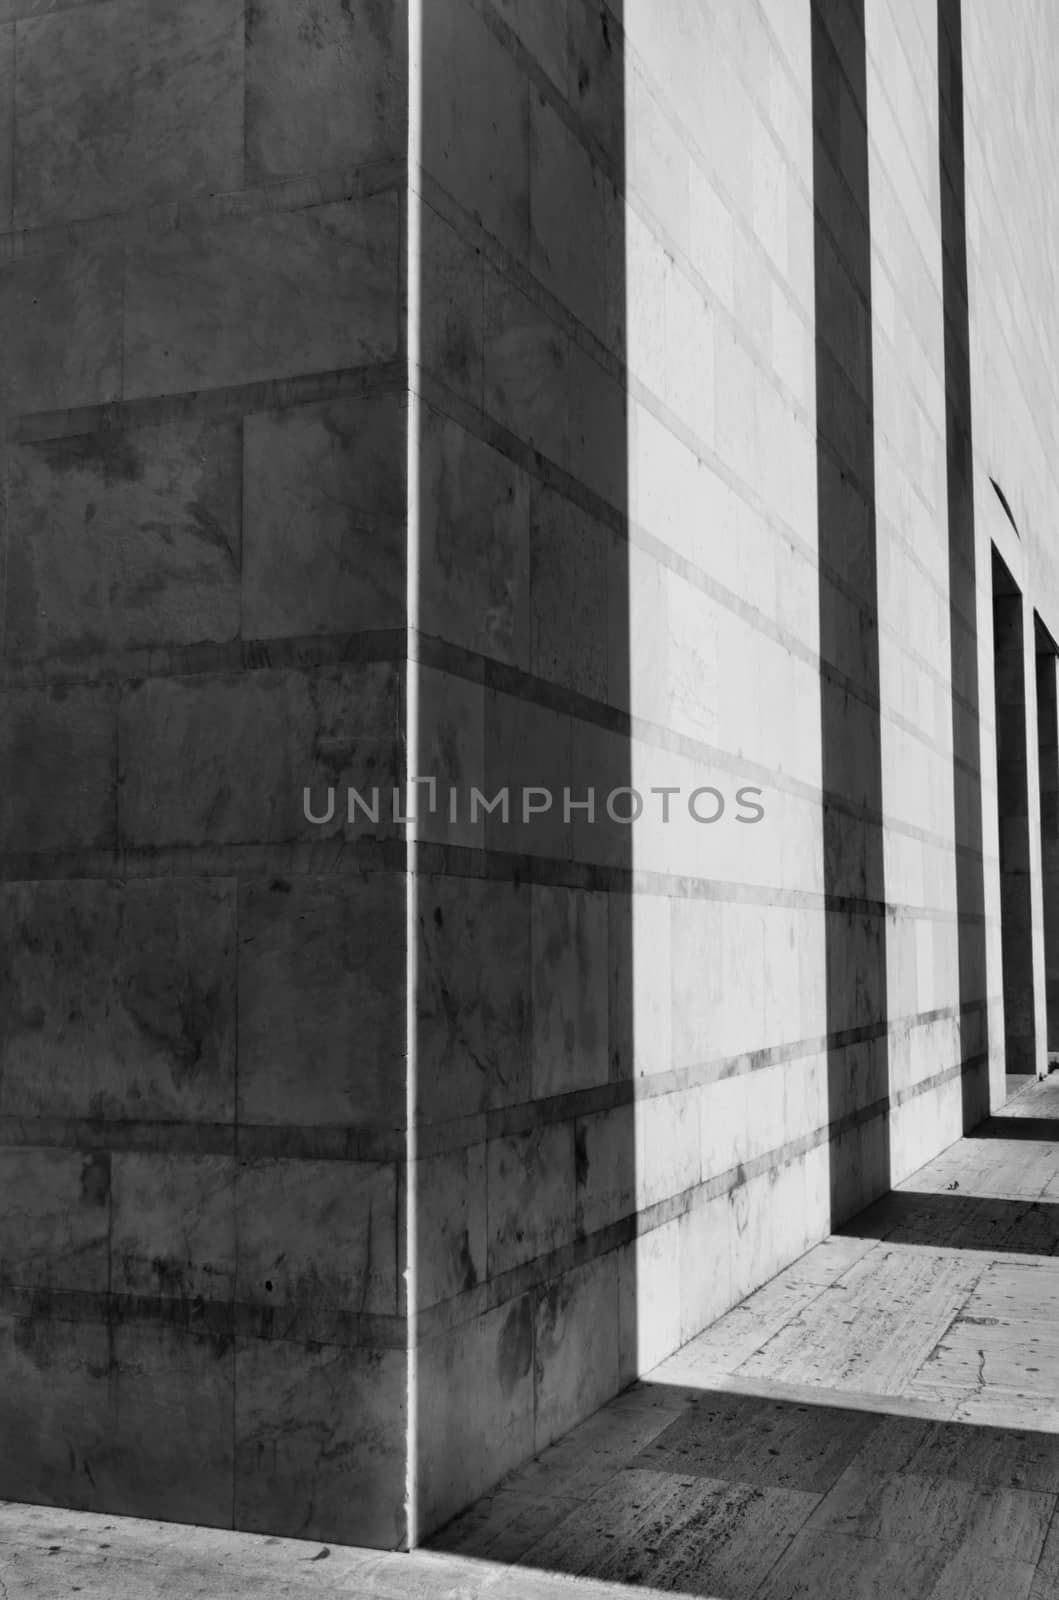 Shadows of a columns row cast on a building facade ,black and white photo ,geometic shape ,vertical composition ,wide angle lens ,